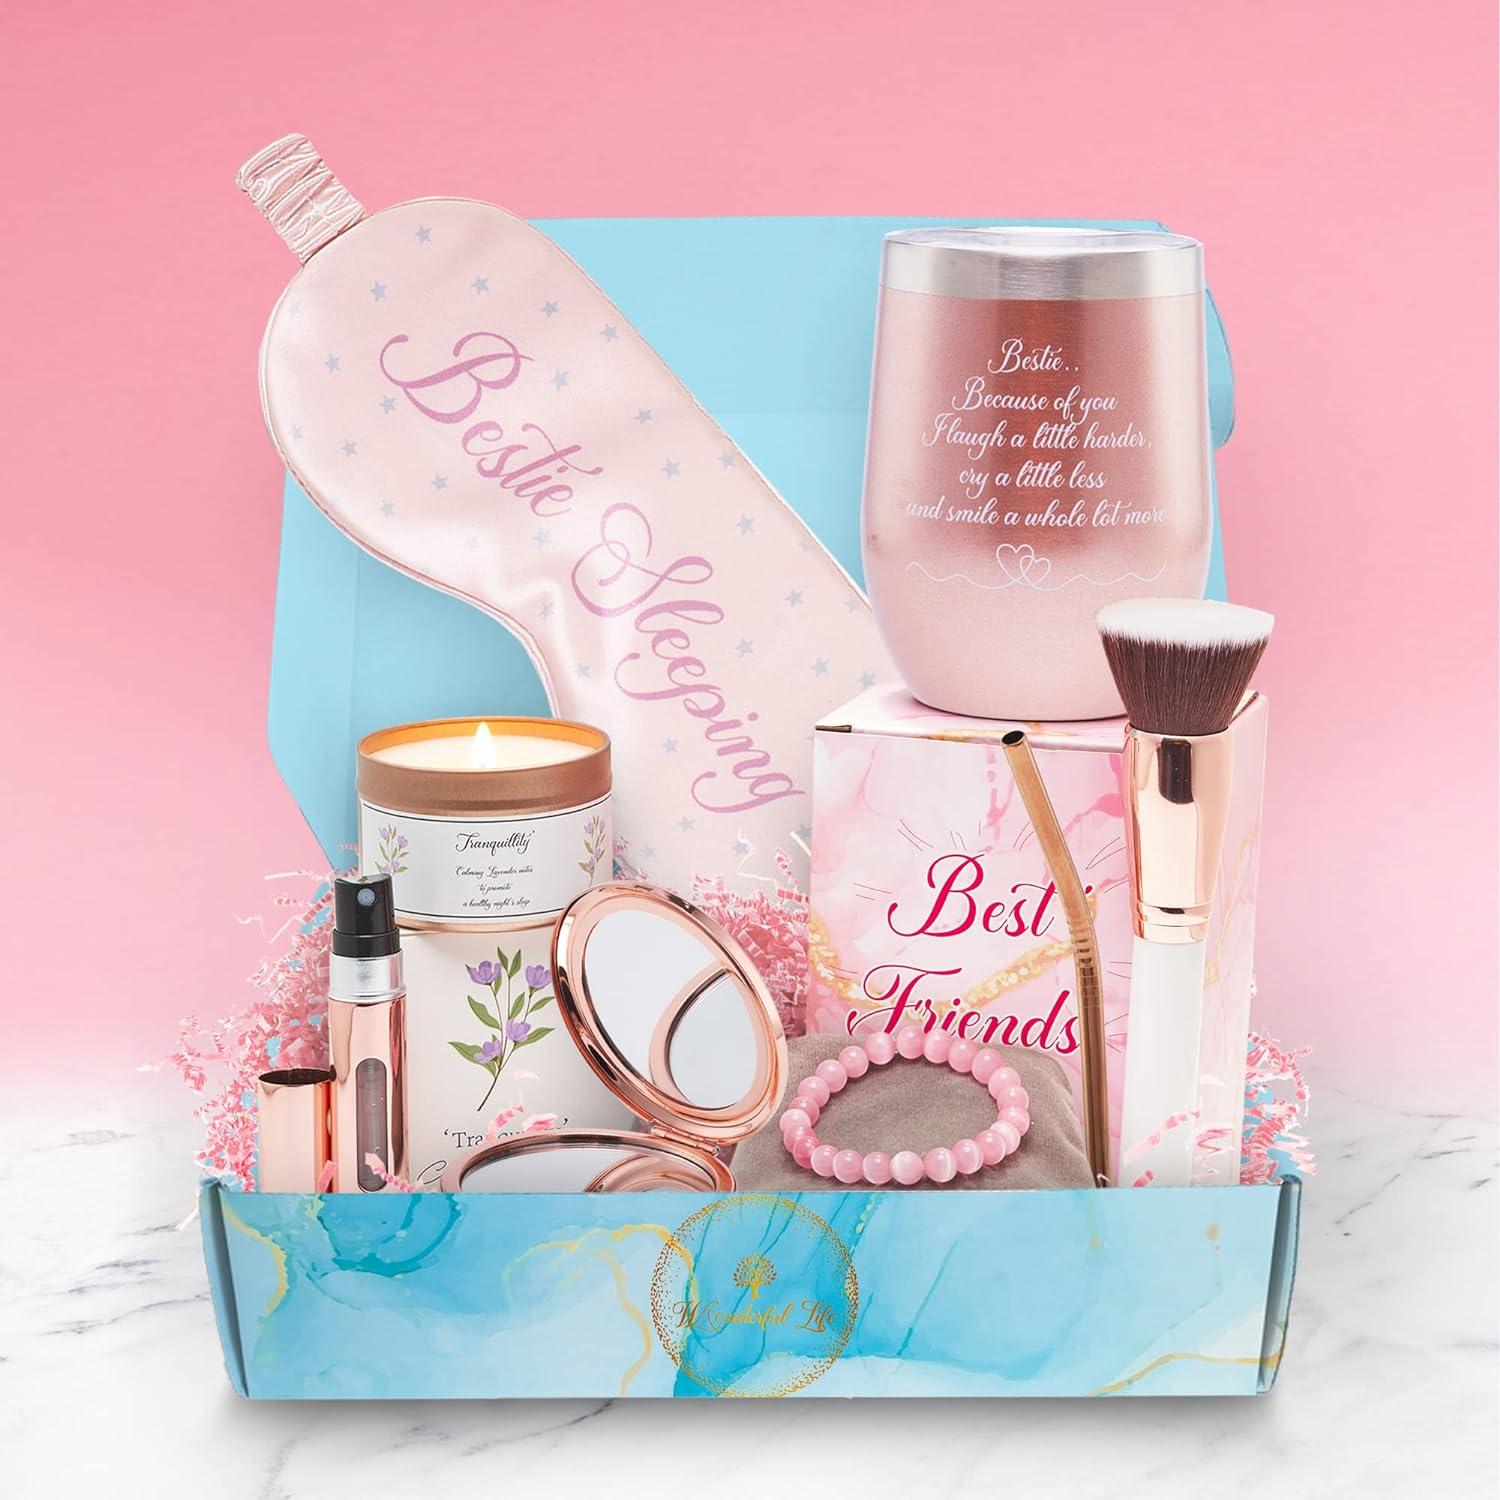 Best Friend Gift Basket - Gifts for Teenage Girls - Best Friend Birthday  Gifts for Women - Best Friend Gift Box - Pink Tumbler Perfume Atomizer  Make-up Mirror Sleep Mask Candle and more